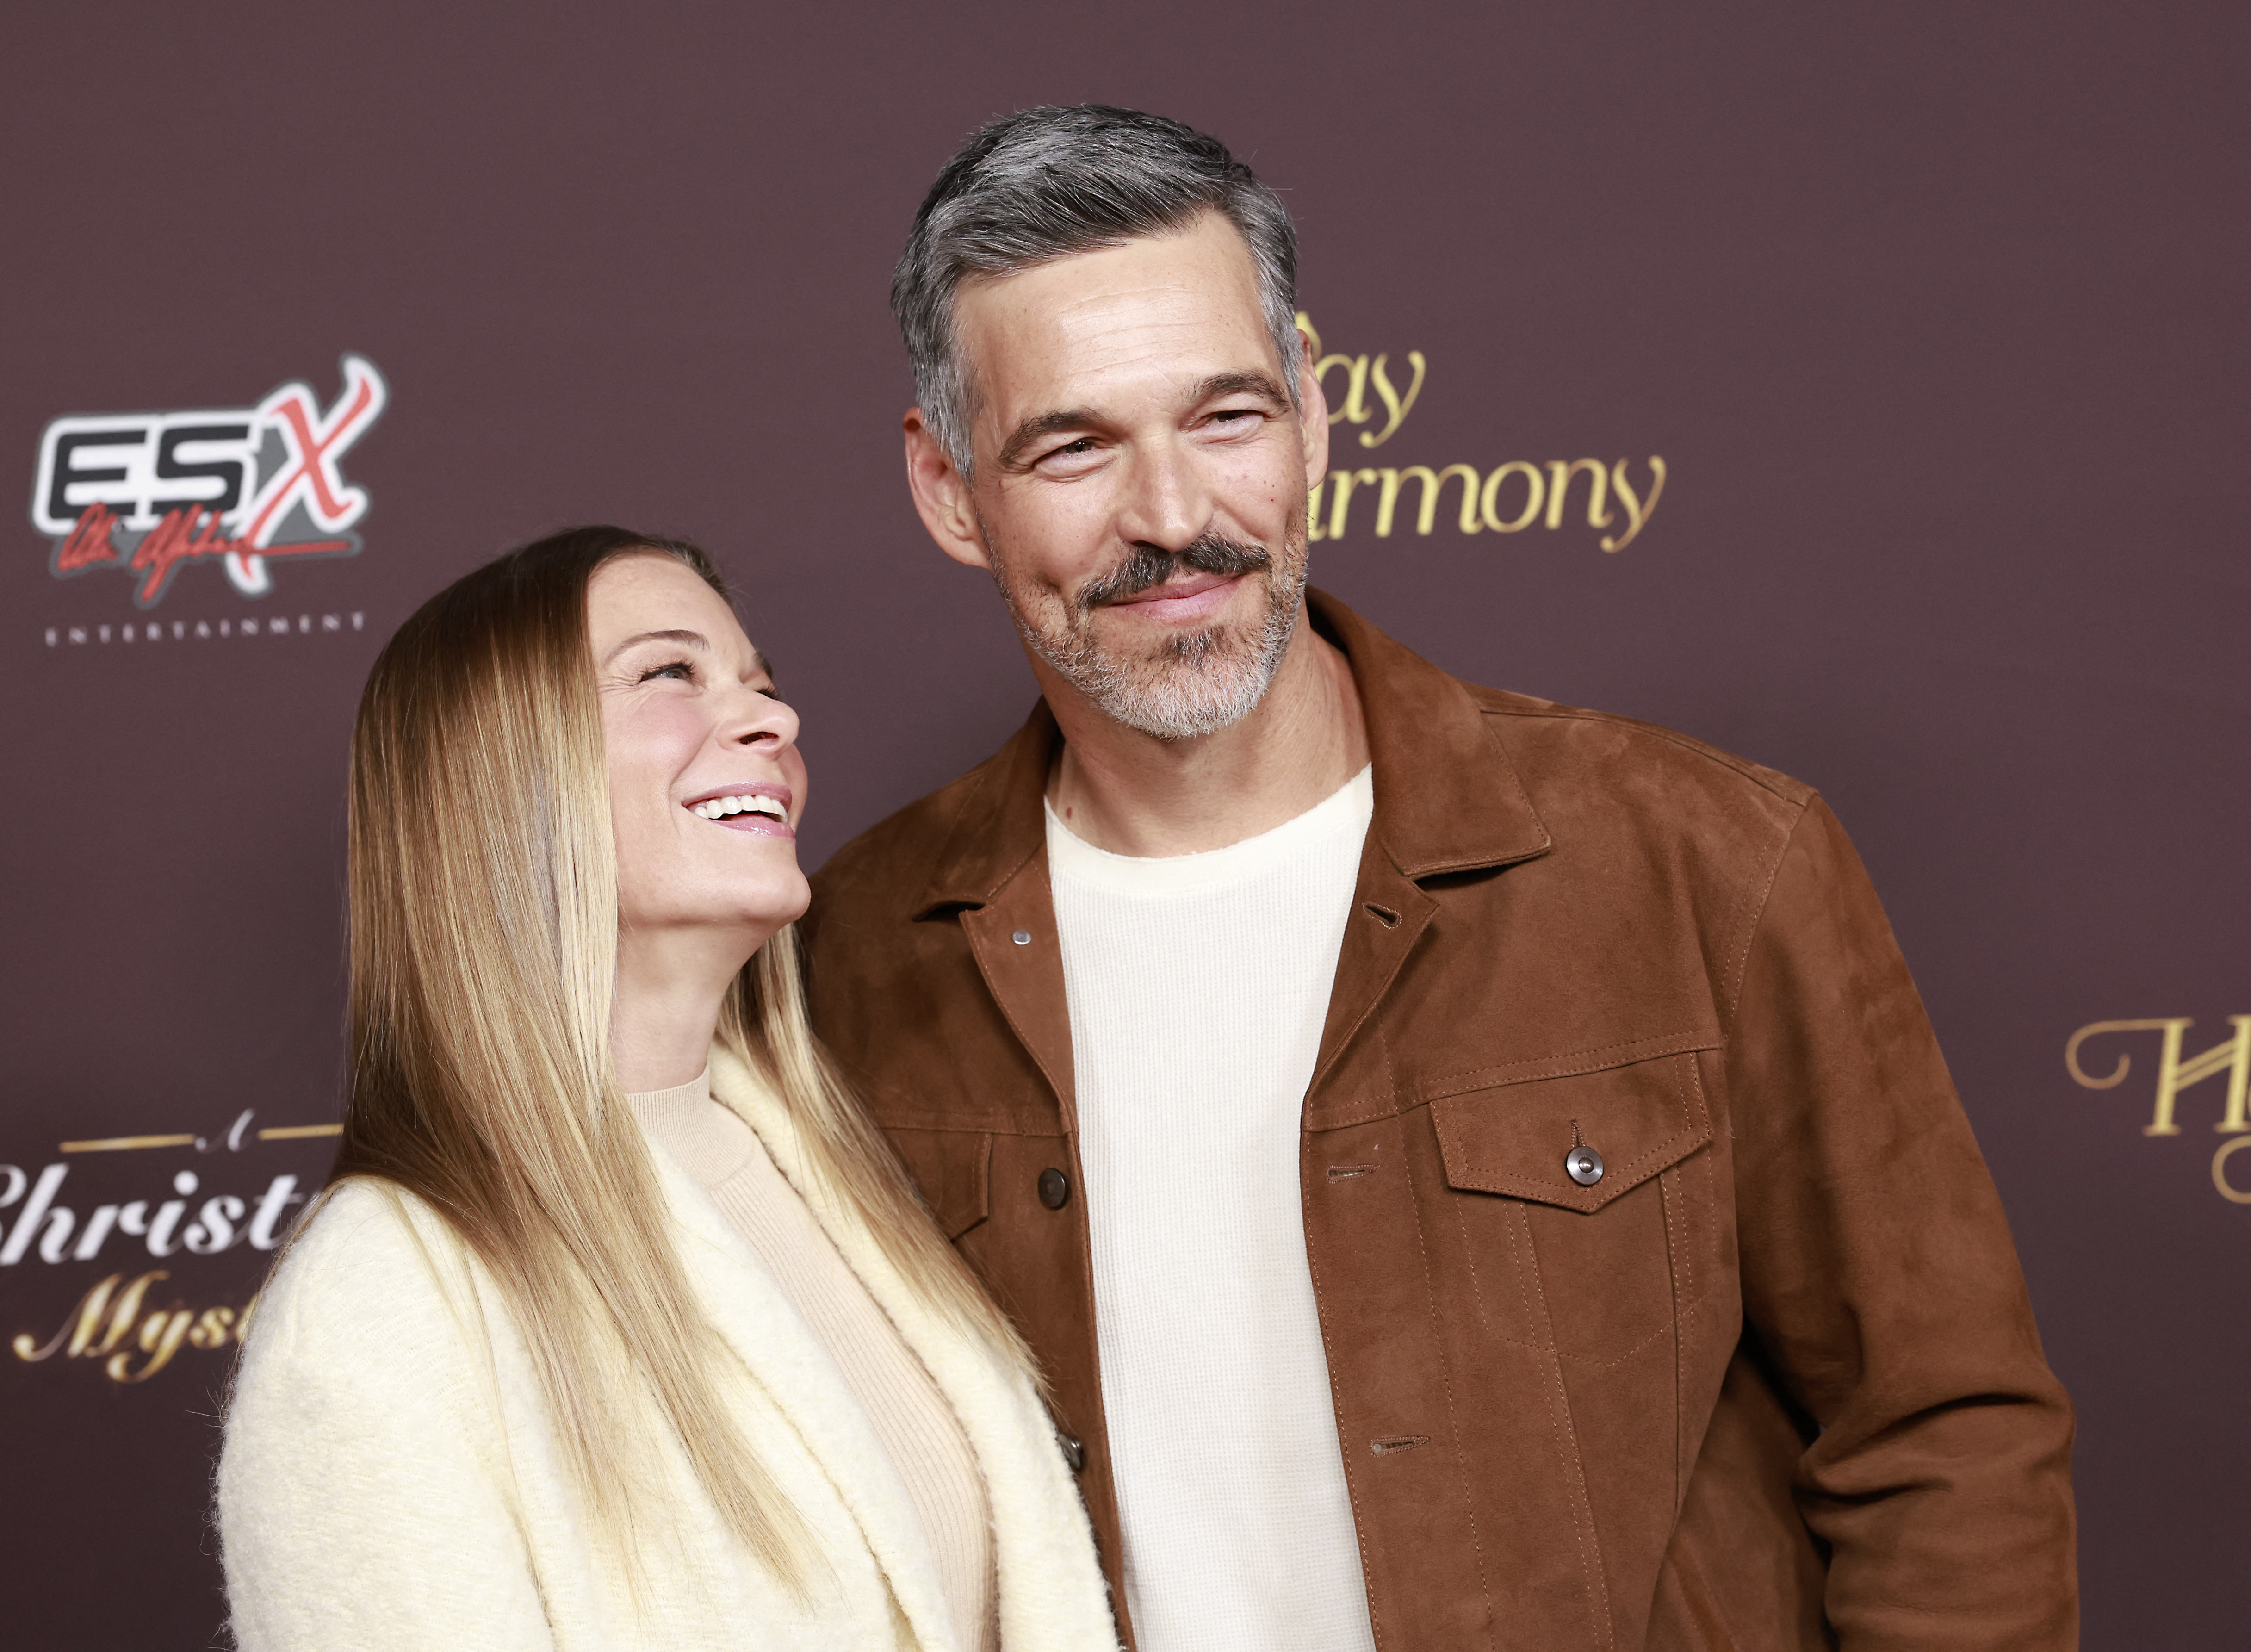 LeAnn Rimes (L) and husband Eddie Cibrian attend Warner Bros. and HBO Max Holiday Movies event at the Warner Bros. studio lot in, Burbank, California, on November 16, 2022. | Source: Getty Images